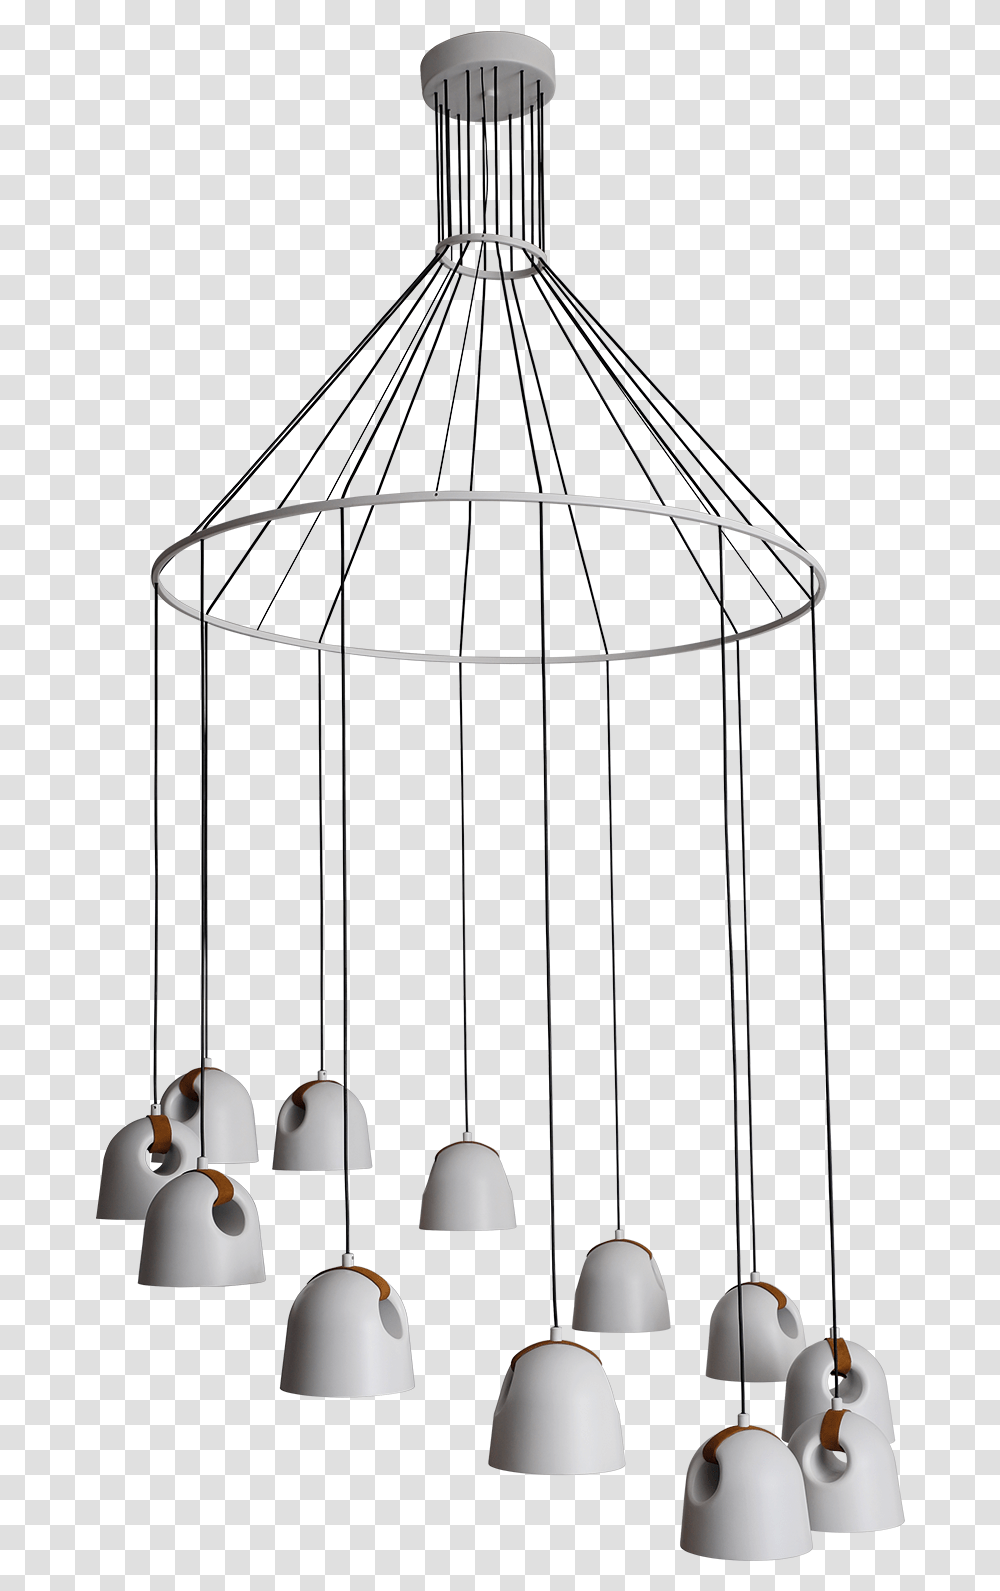 Cowbell 12xs Mumoon Illustration, Lamp, Chime, Musical Instrument, Windchime Transparent Png